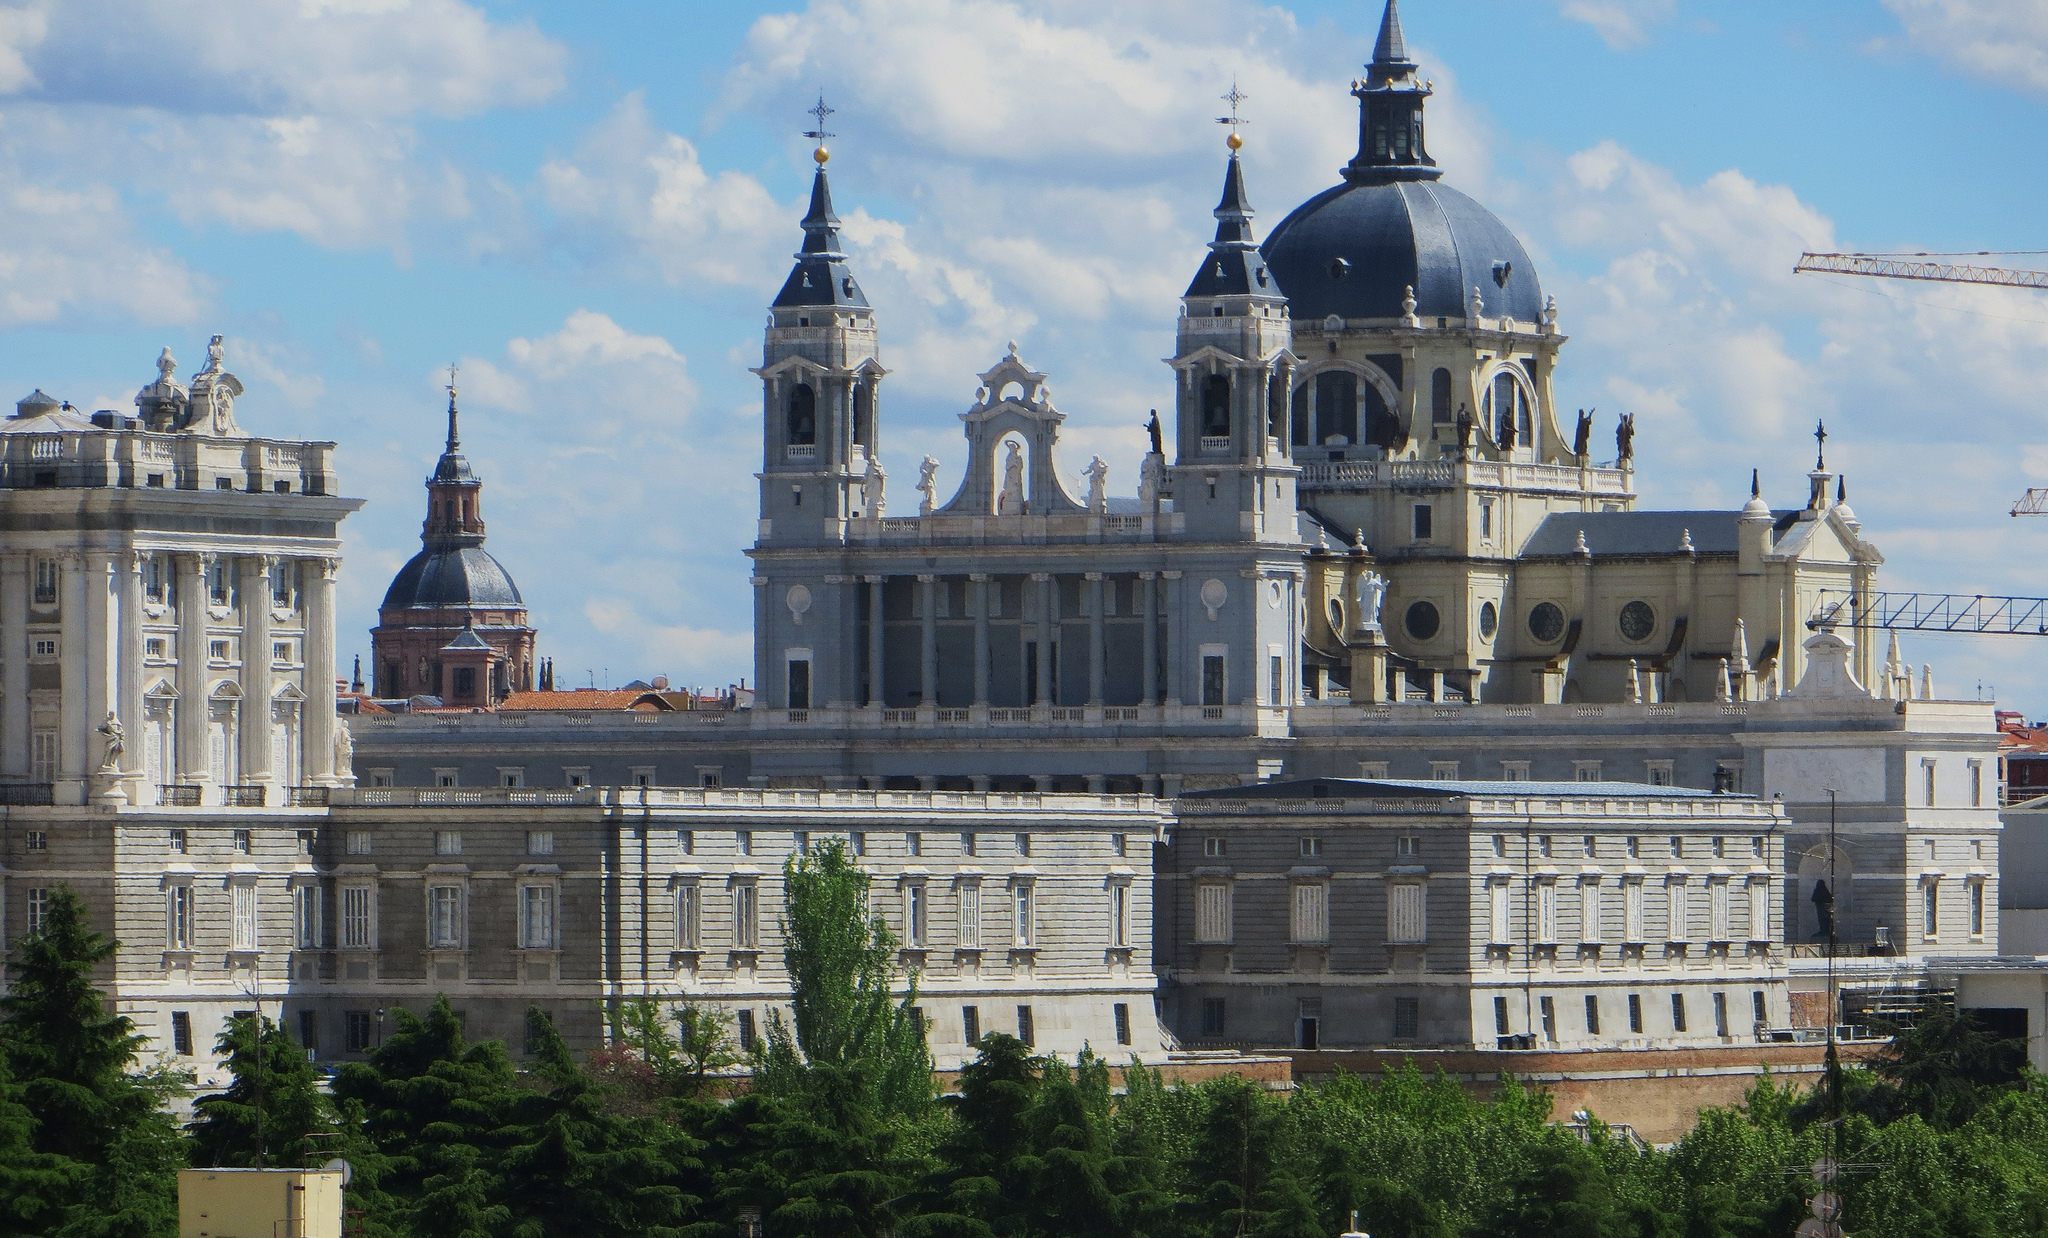 Amazing Almudena Cathedral Pictures & Backgrounds